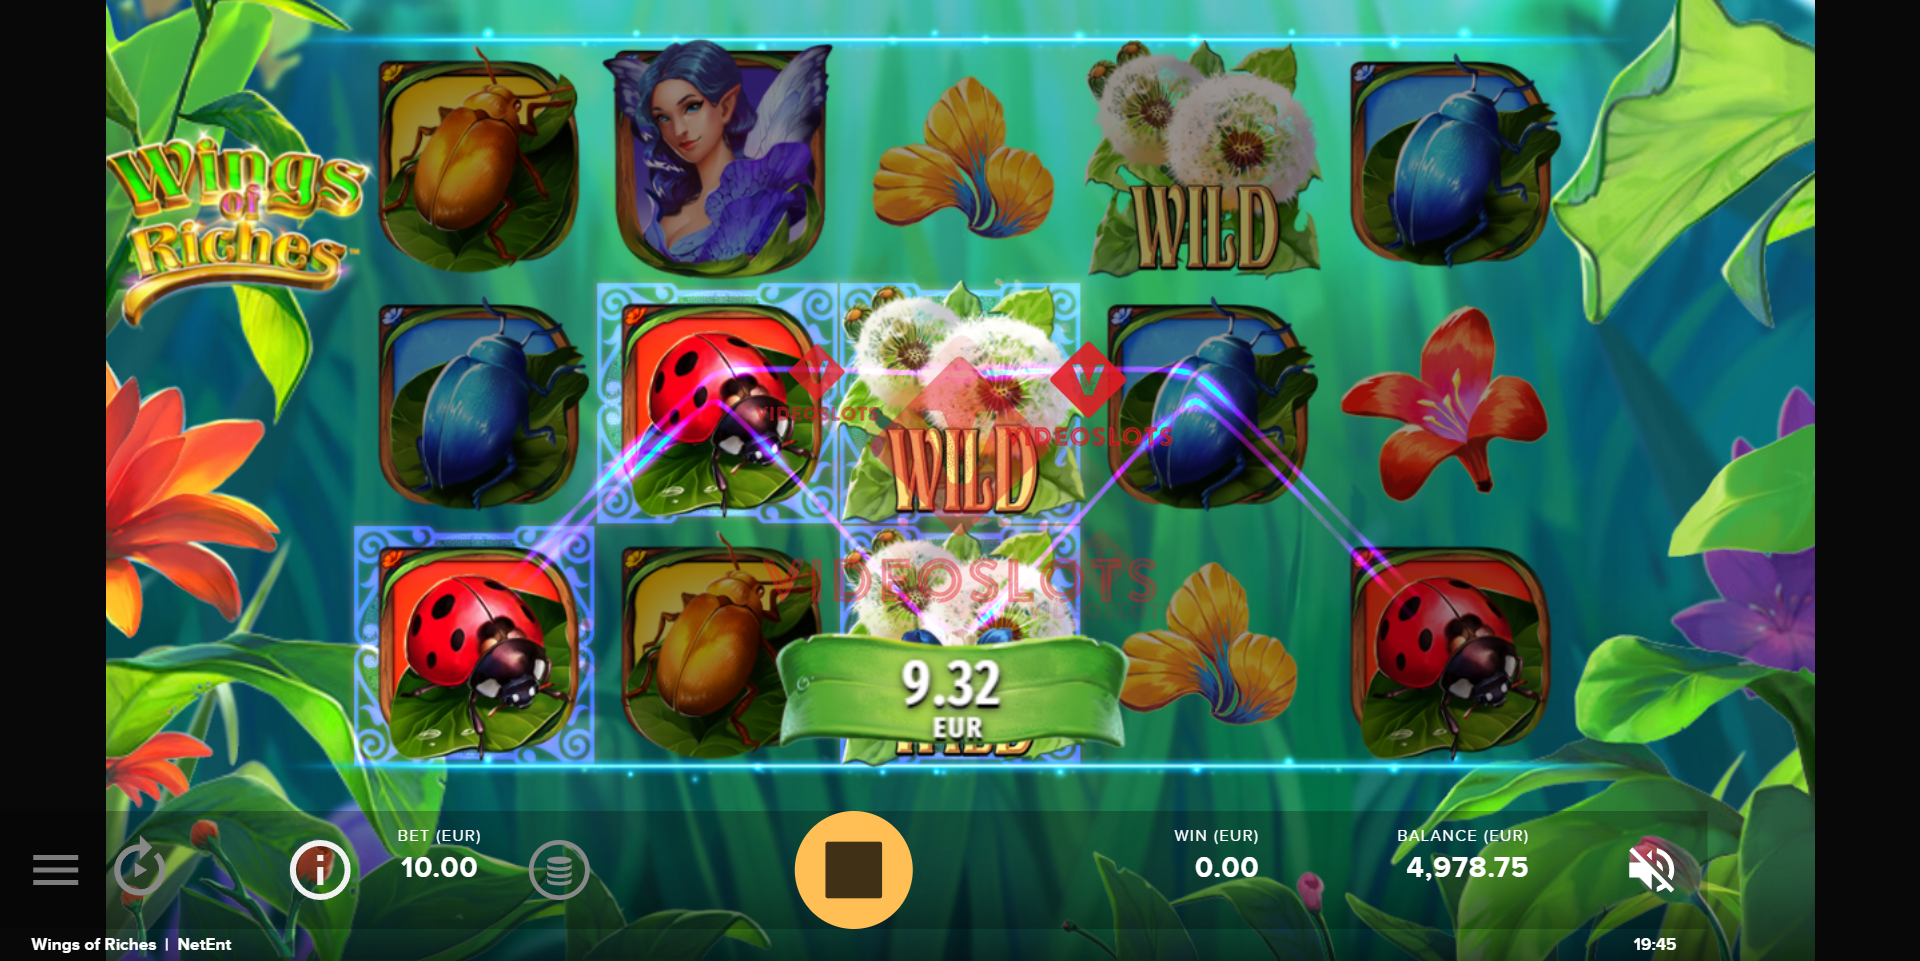 Base Game for Wings of Riches slot from NetEnt